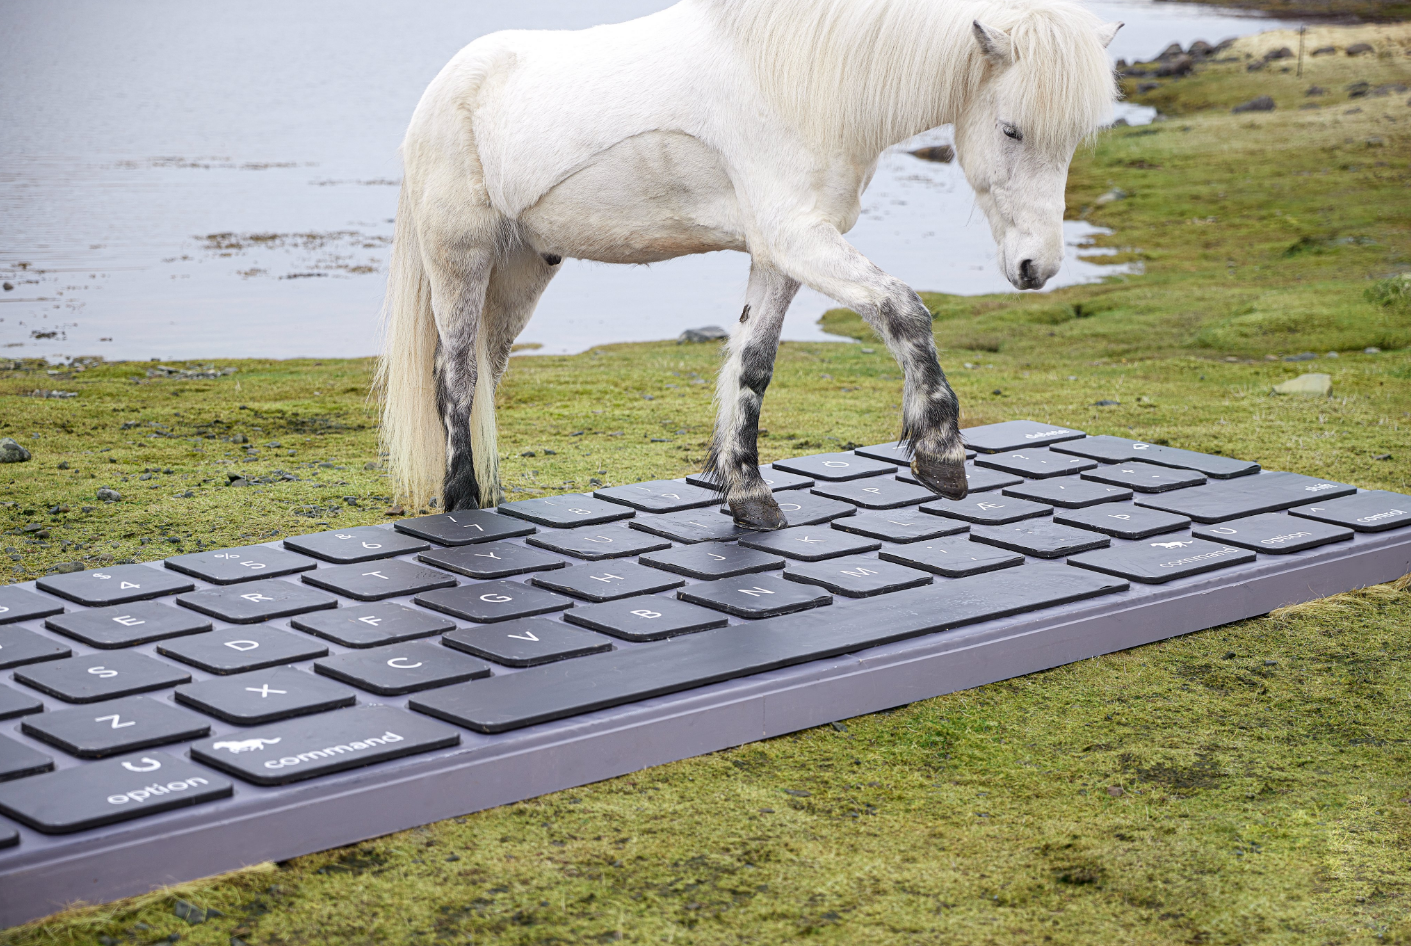 Photo showing a white horse stepping on a large keyboard where the keys are large enough to be easily usable by a horse hoof.